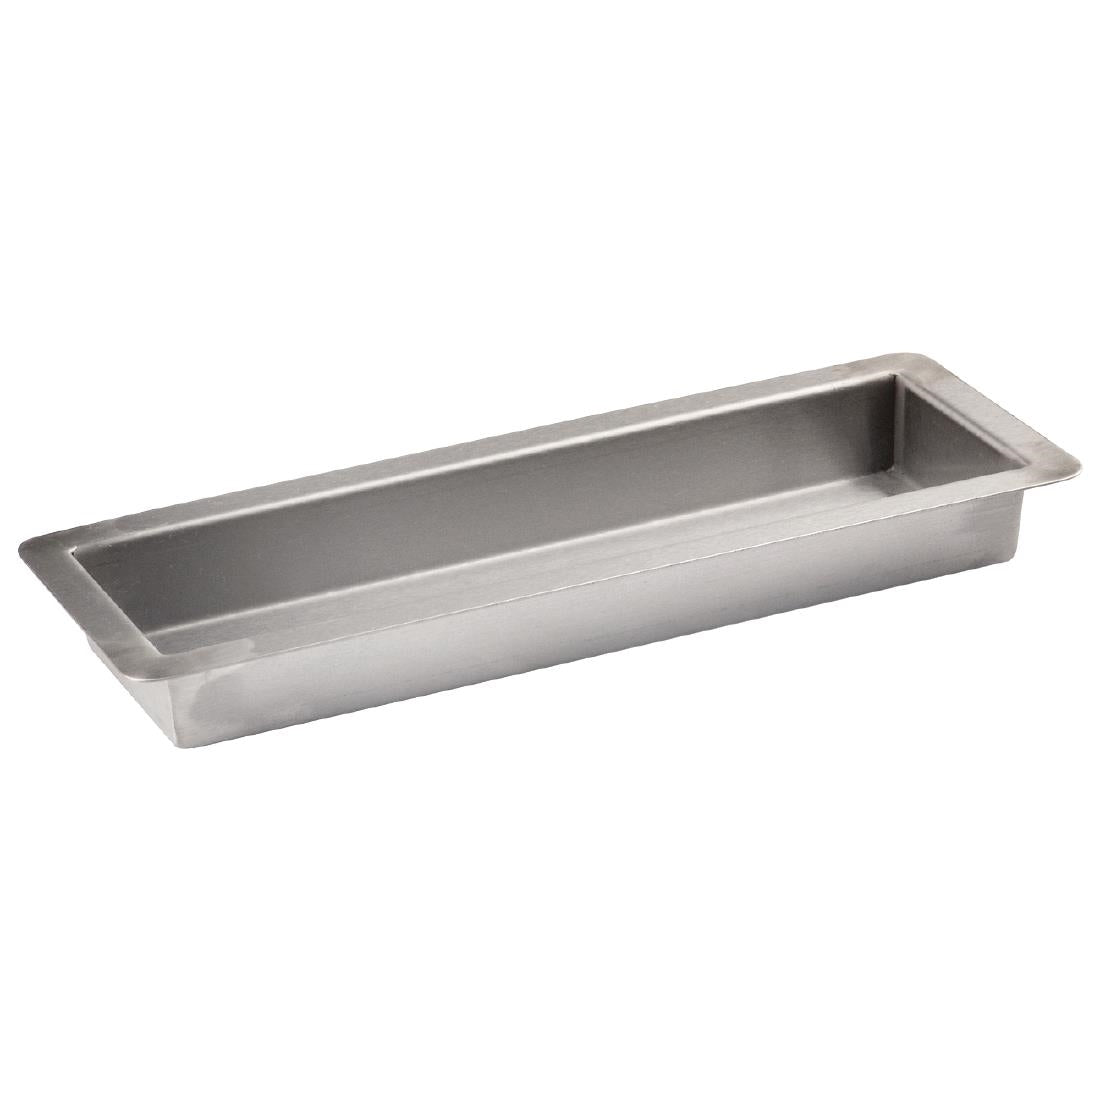 Buffalo Water Tray JD Catering Equipment Solutions Ltd